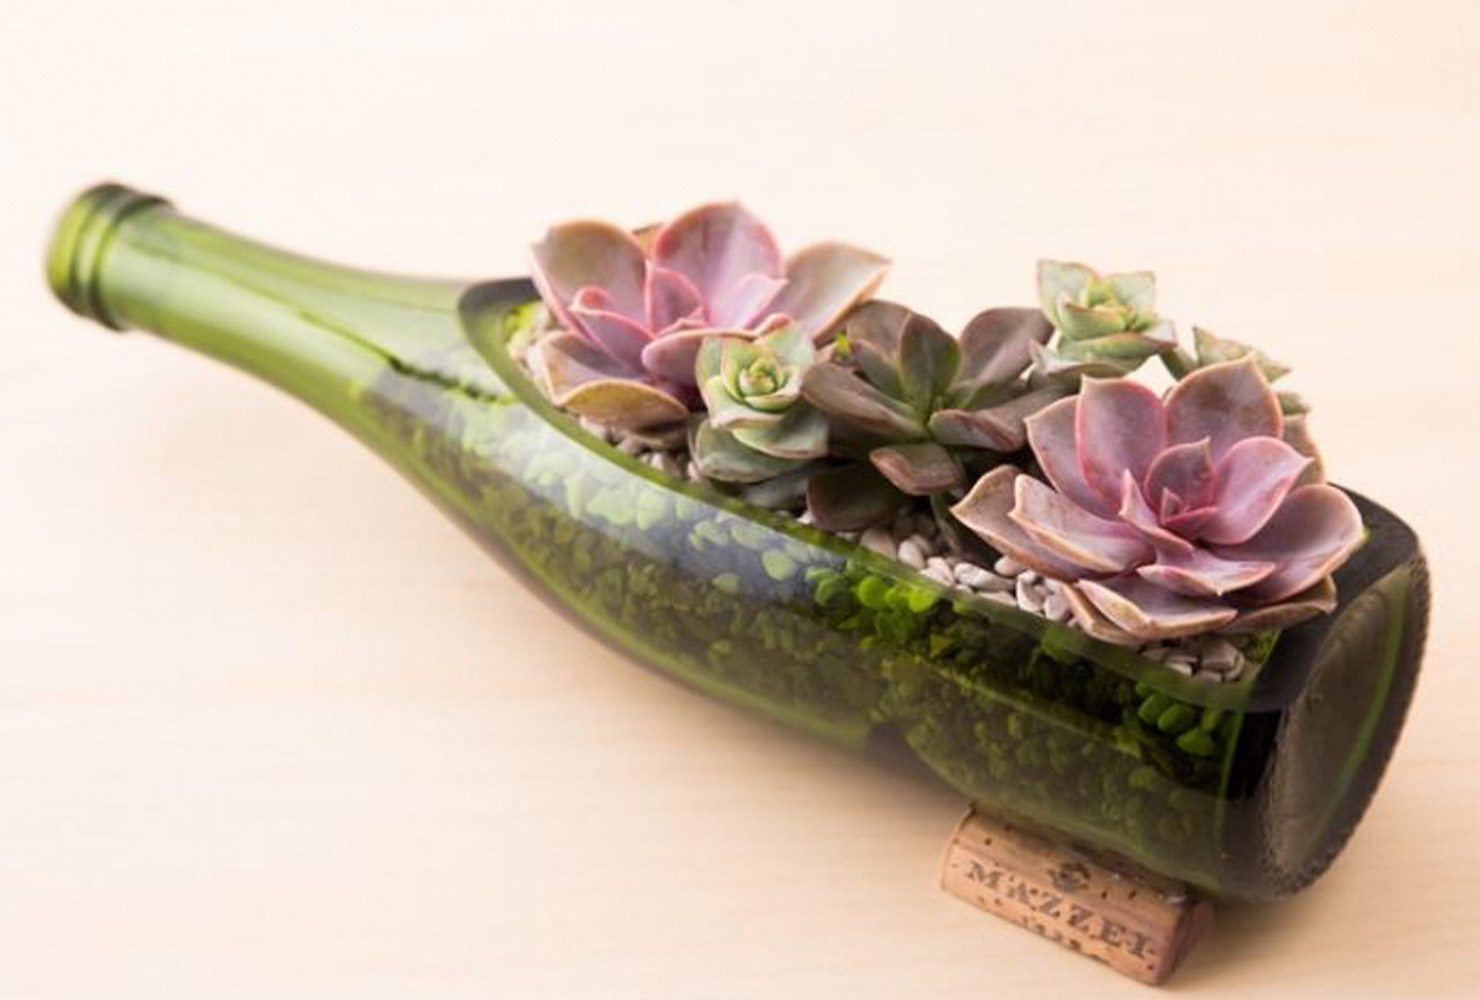 Wine bottle planter with succulents.